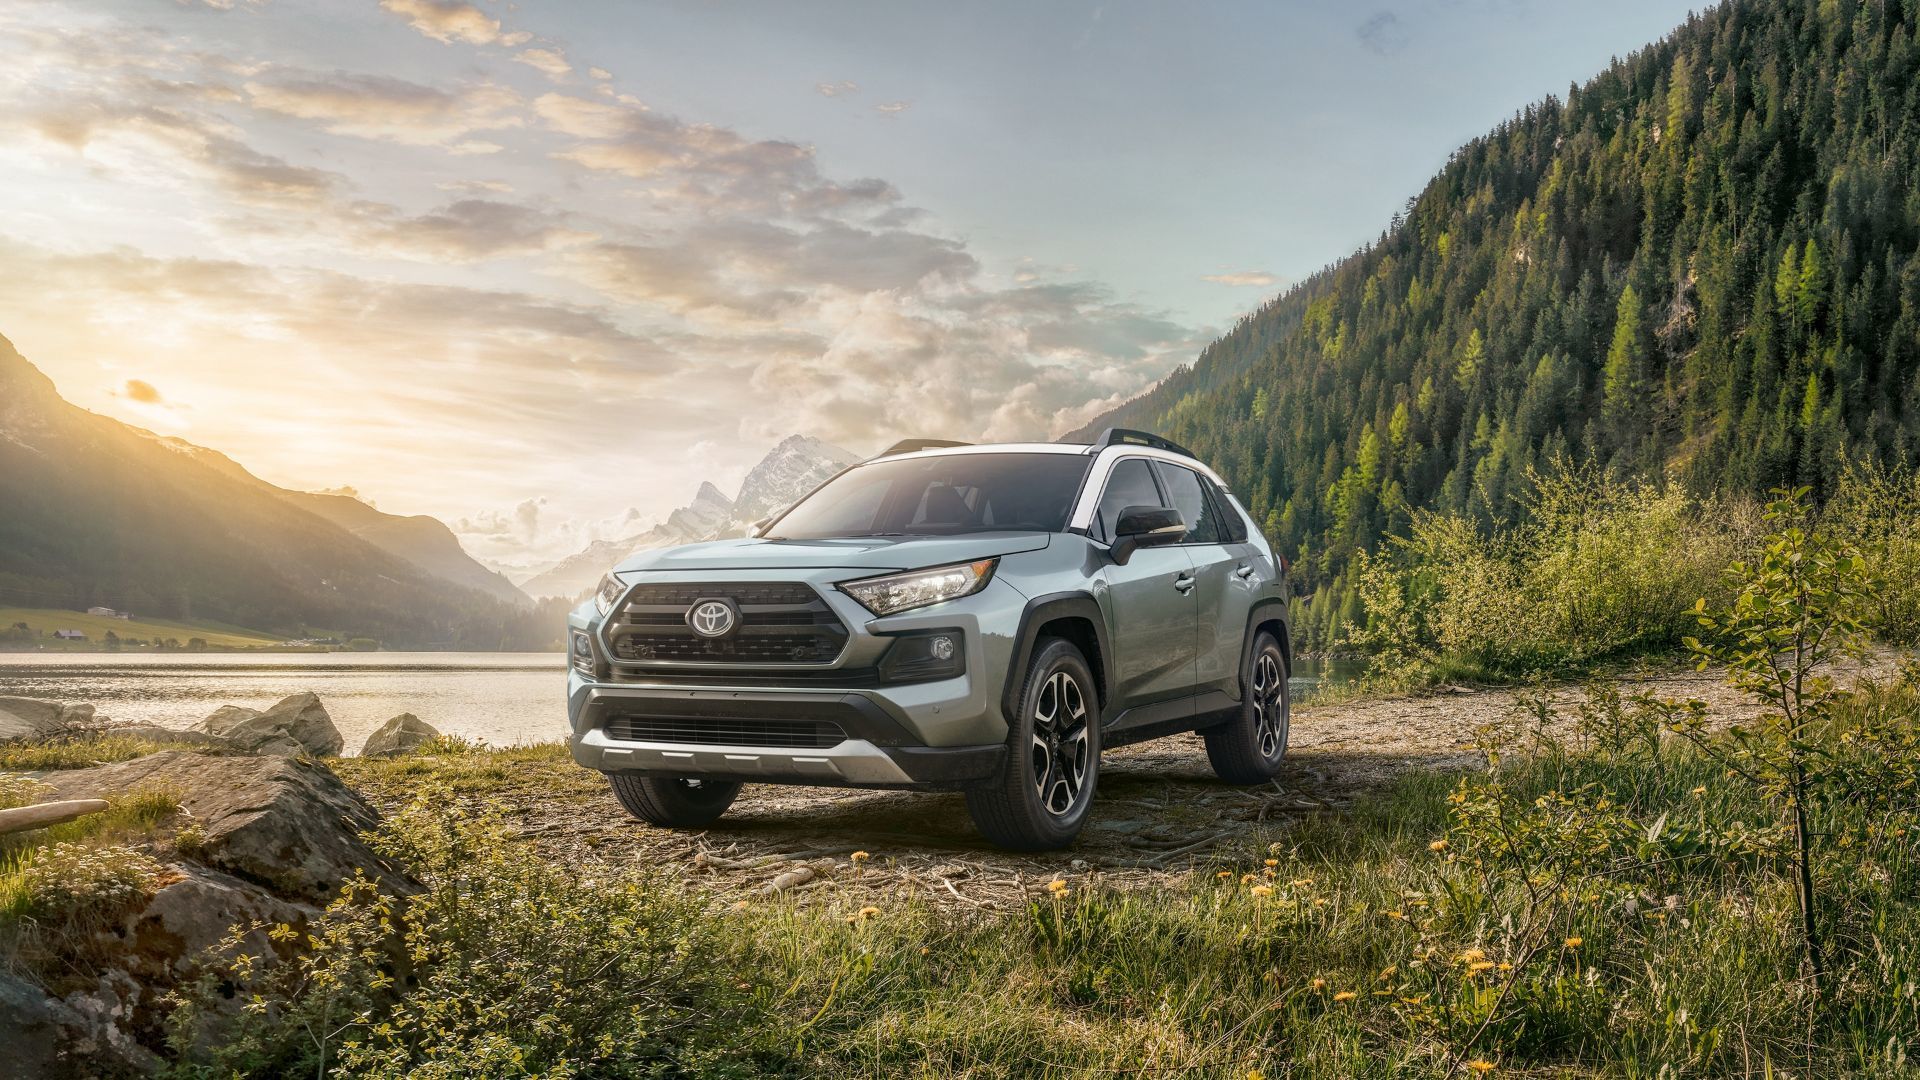 All-New 2019 Toyota RAV4 Unveiled at the New York International Auto Show